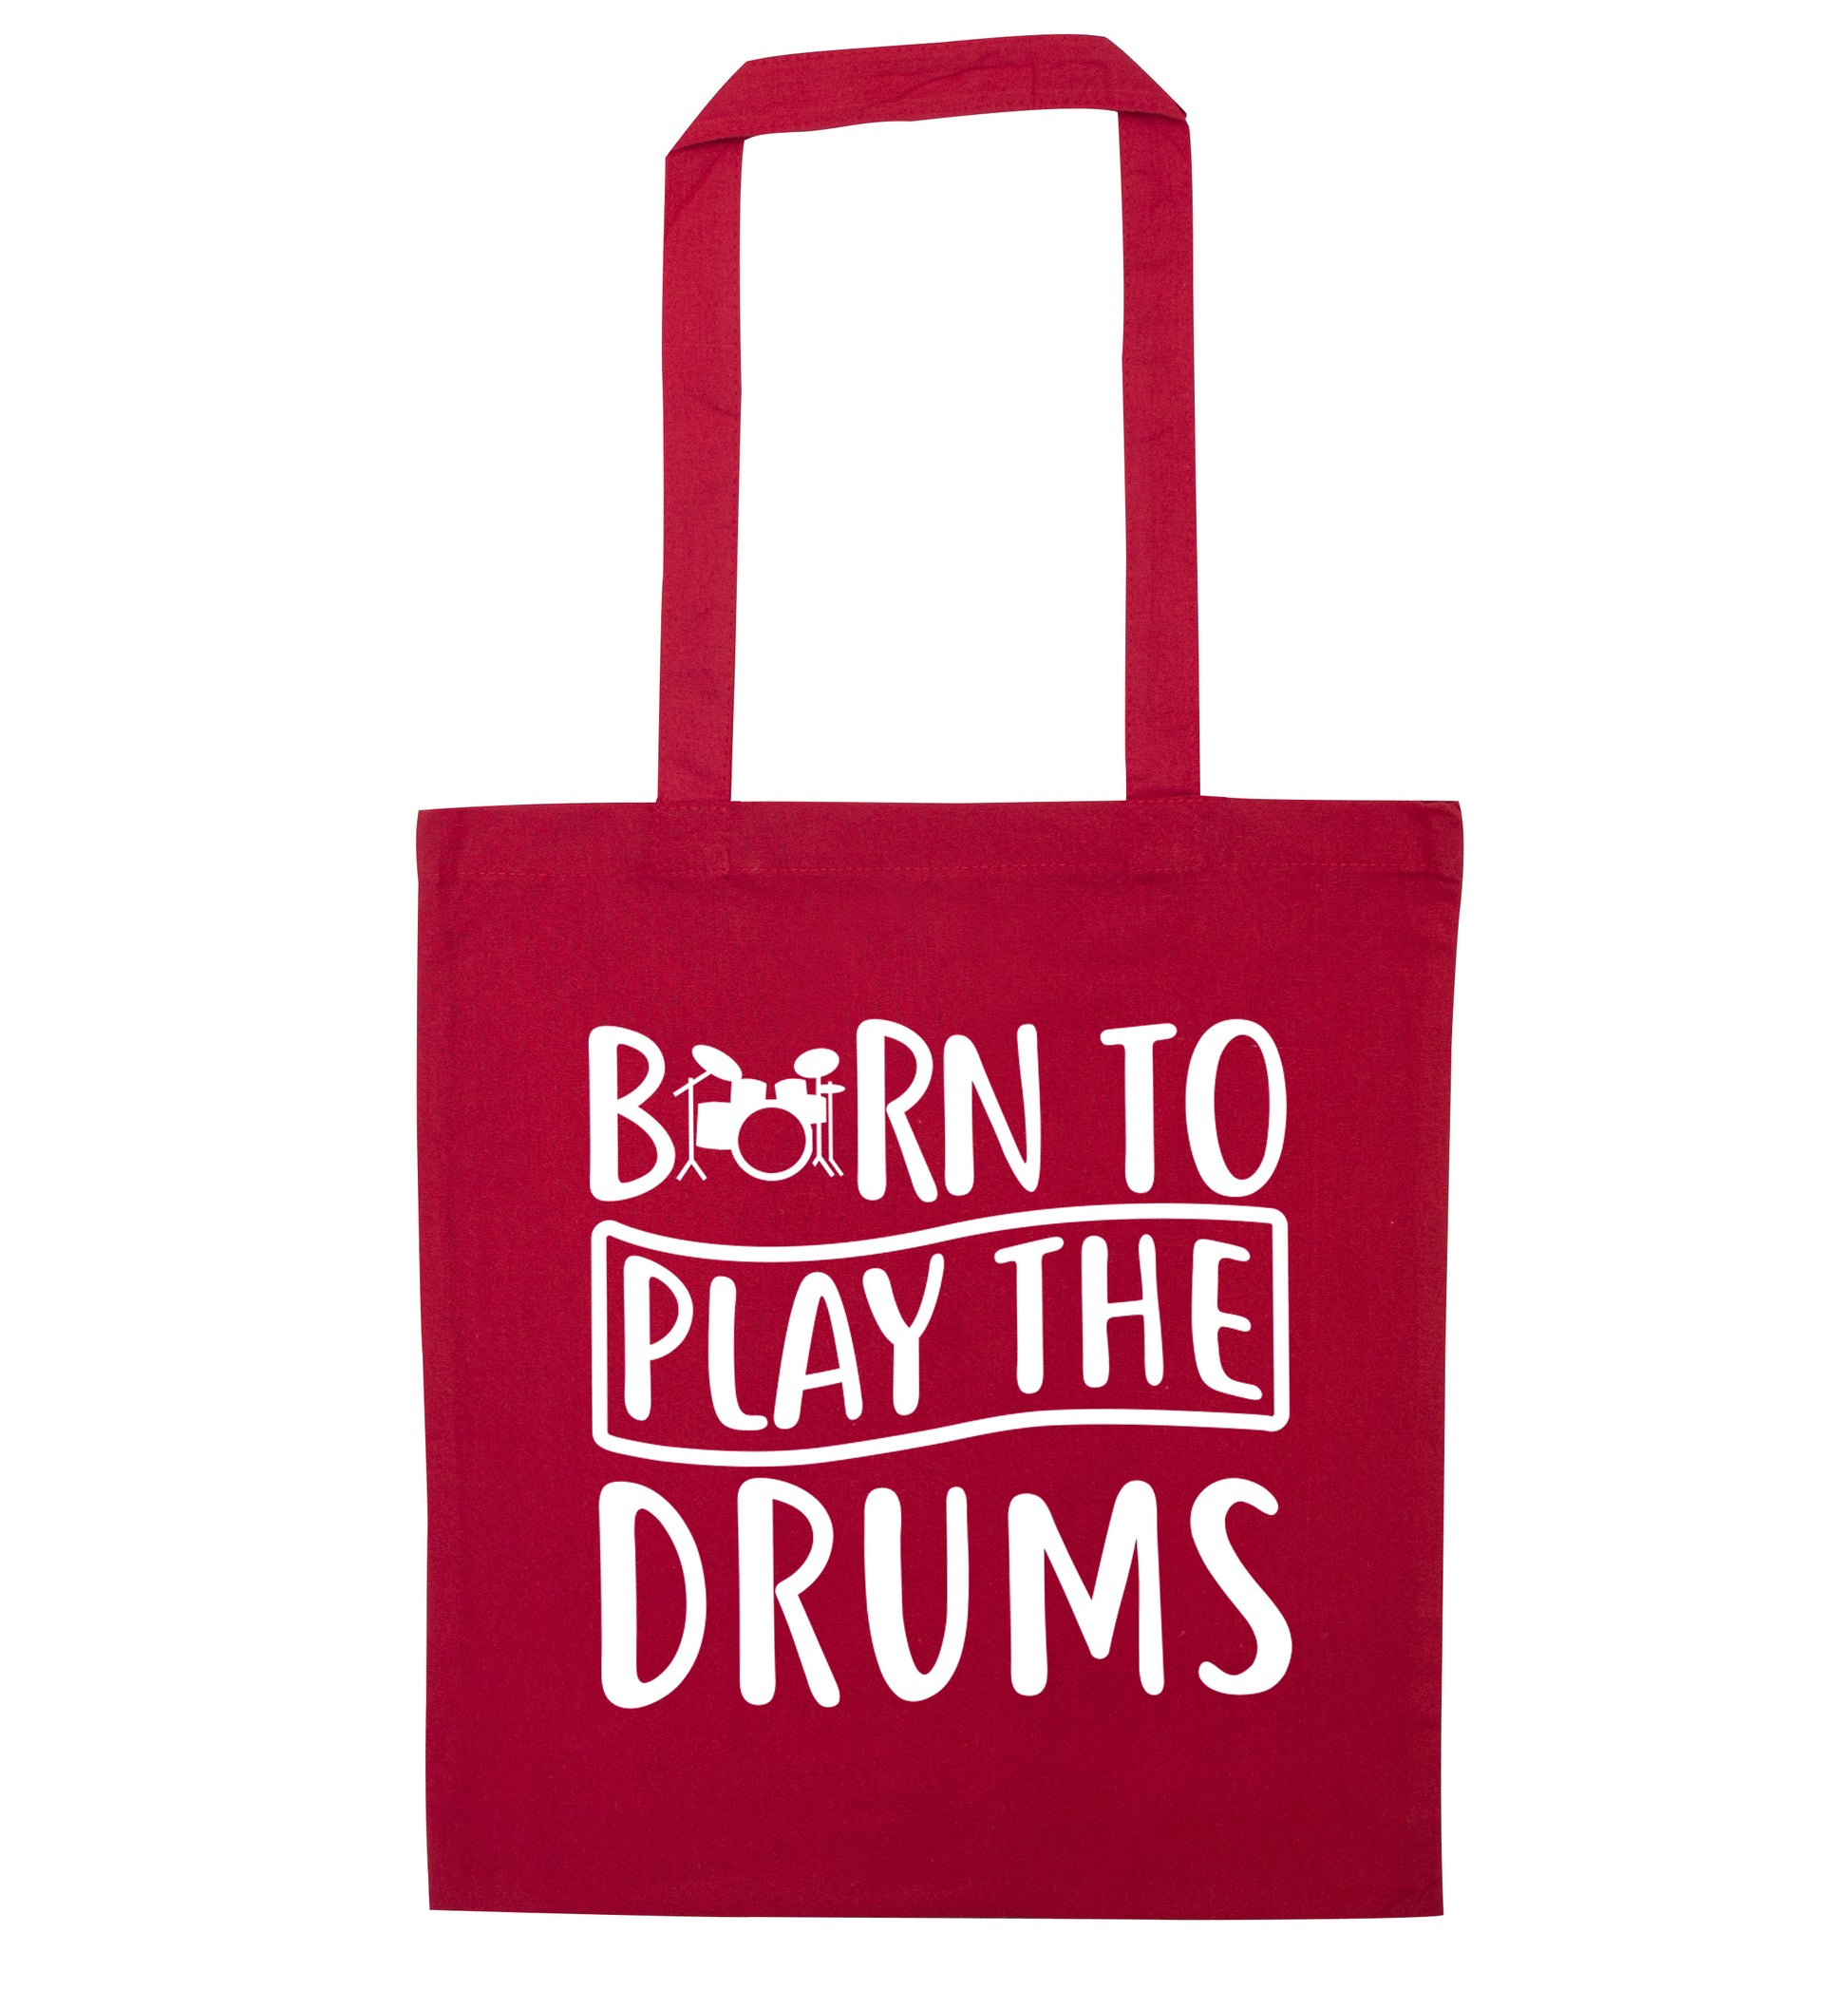 Born to play the drums red tote bag